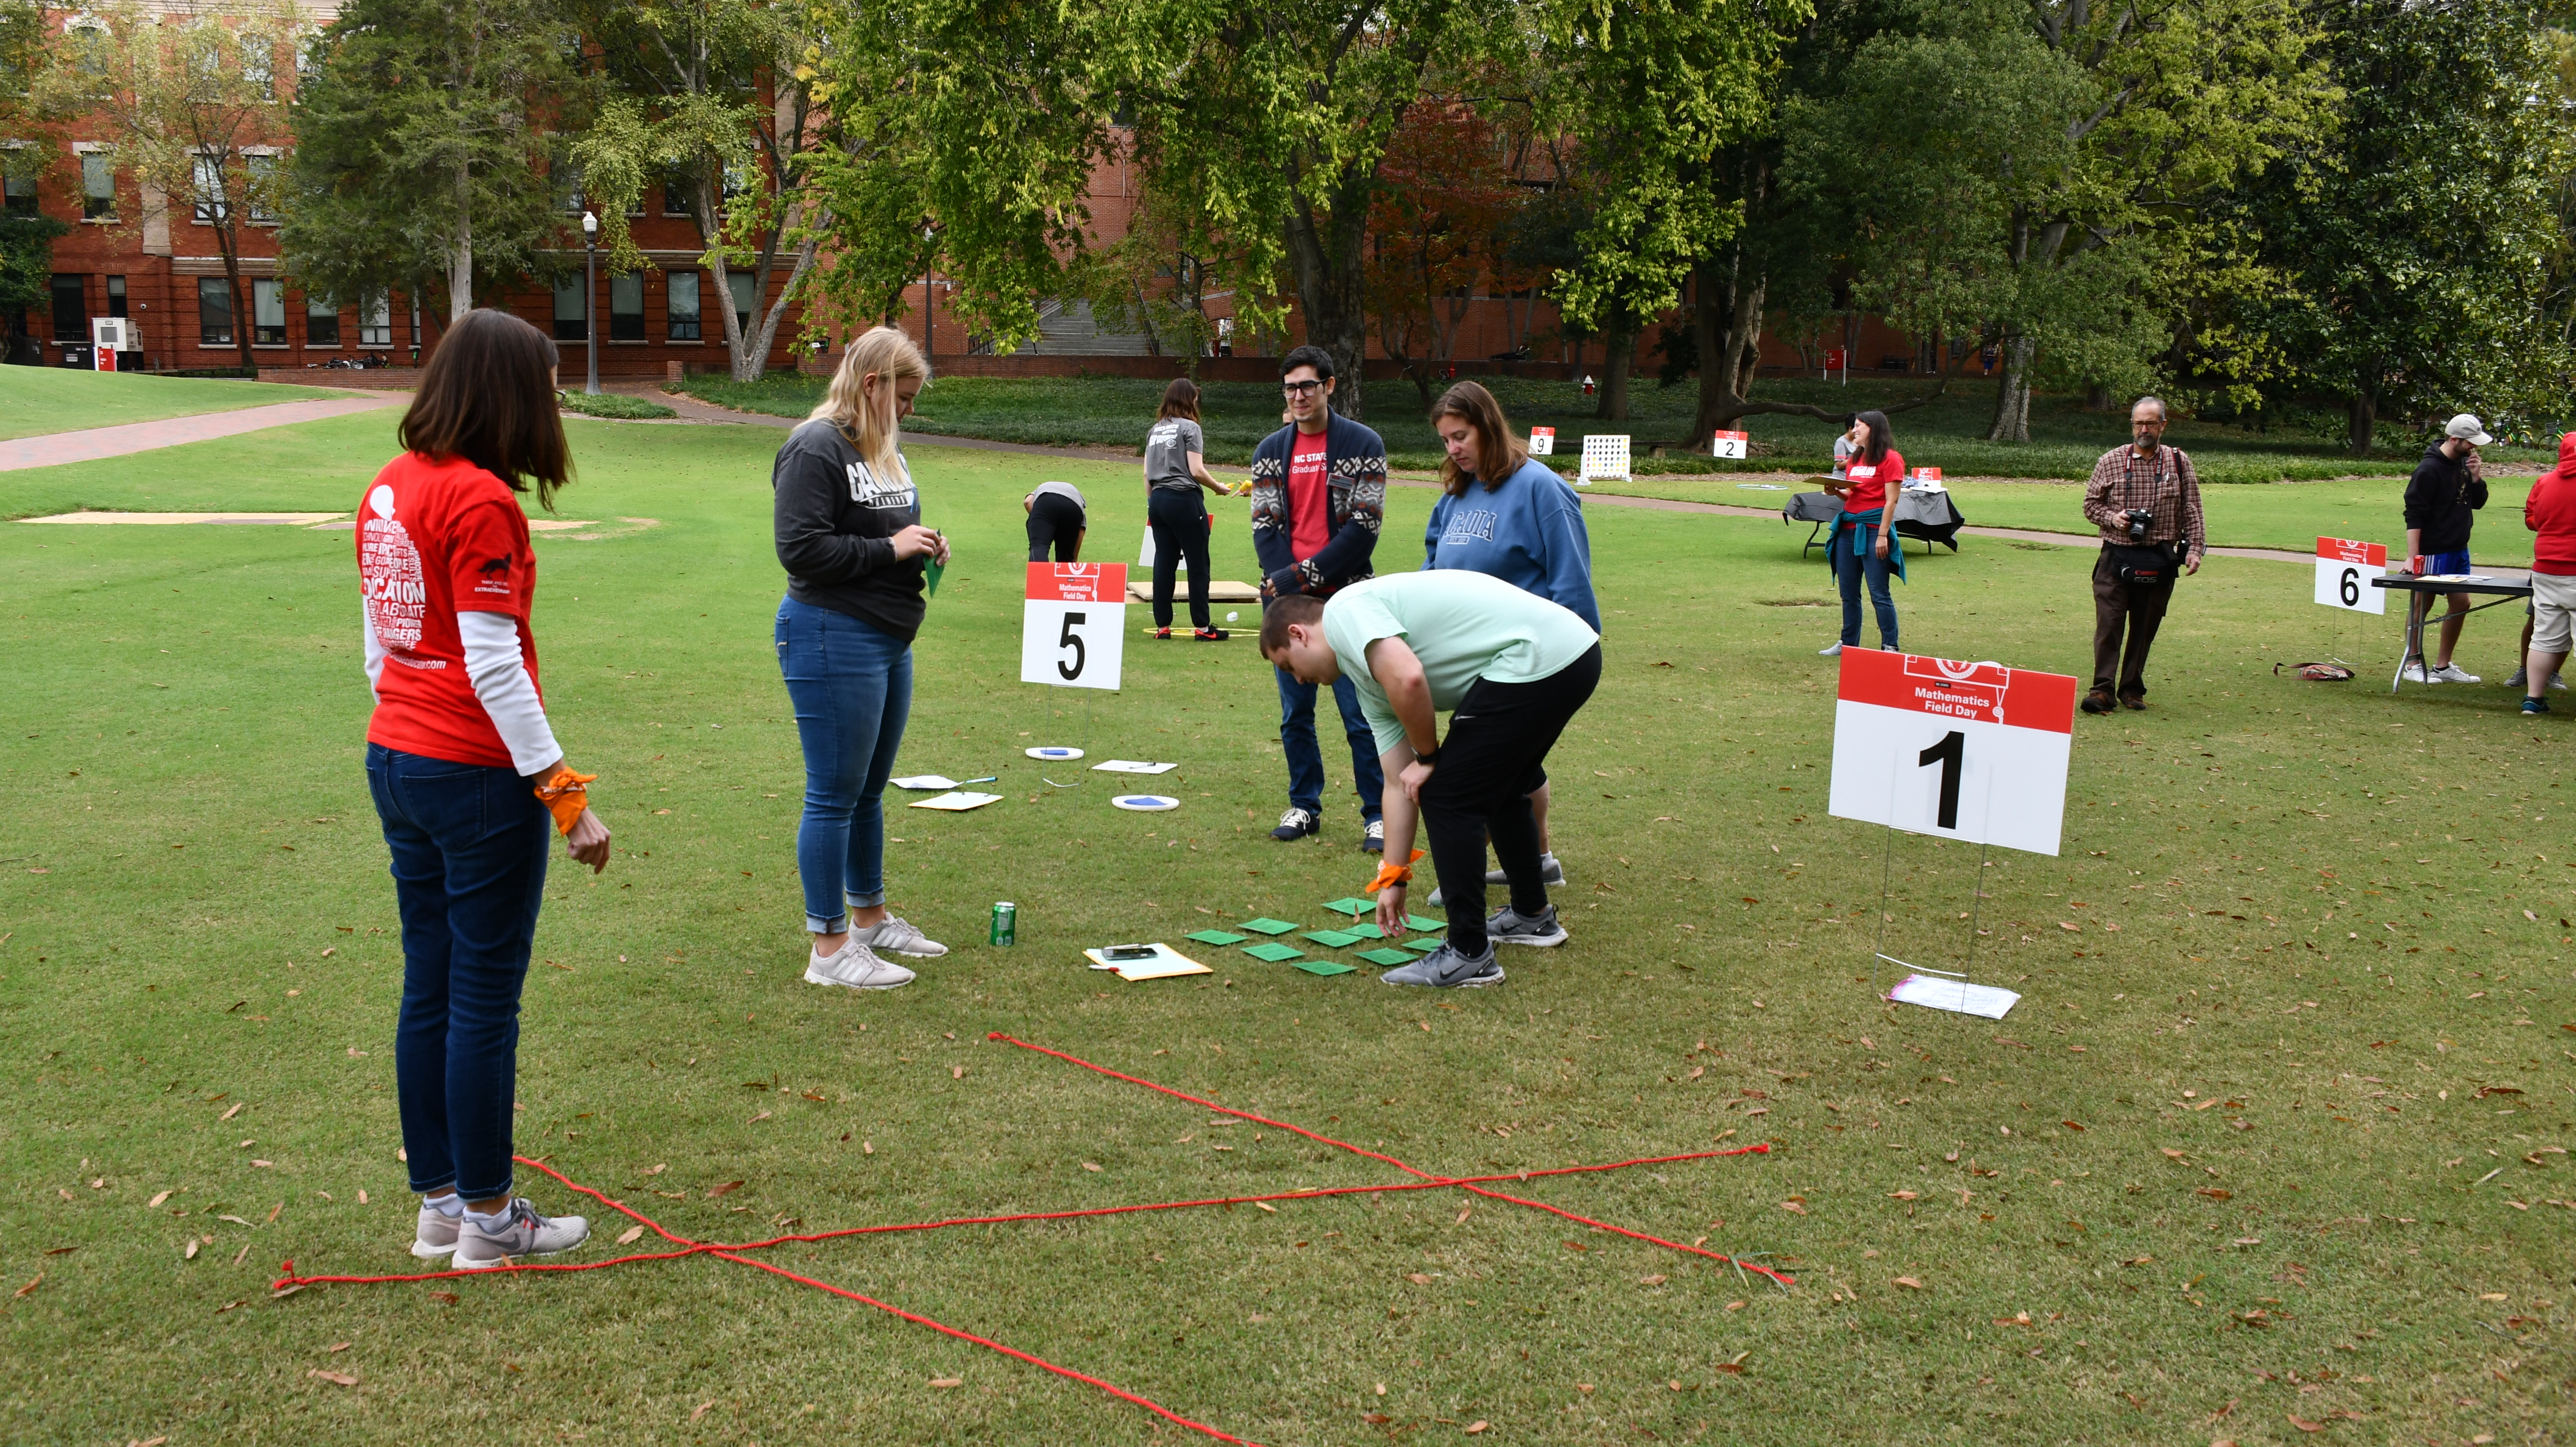 Activities featured physical and mathematical components during Mathematics Field Day